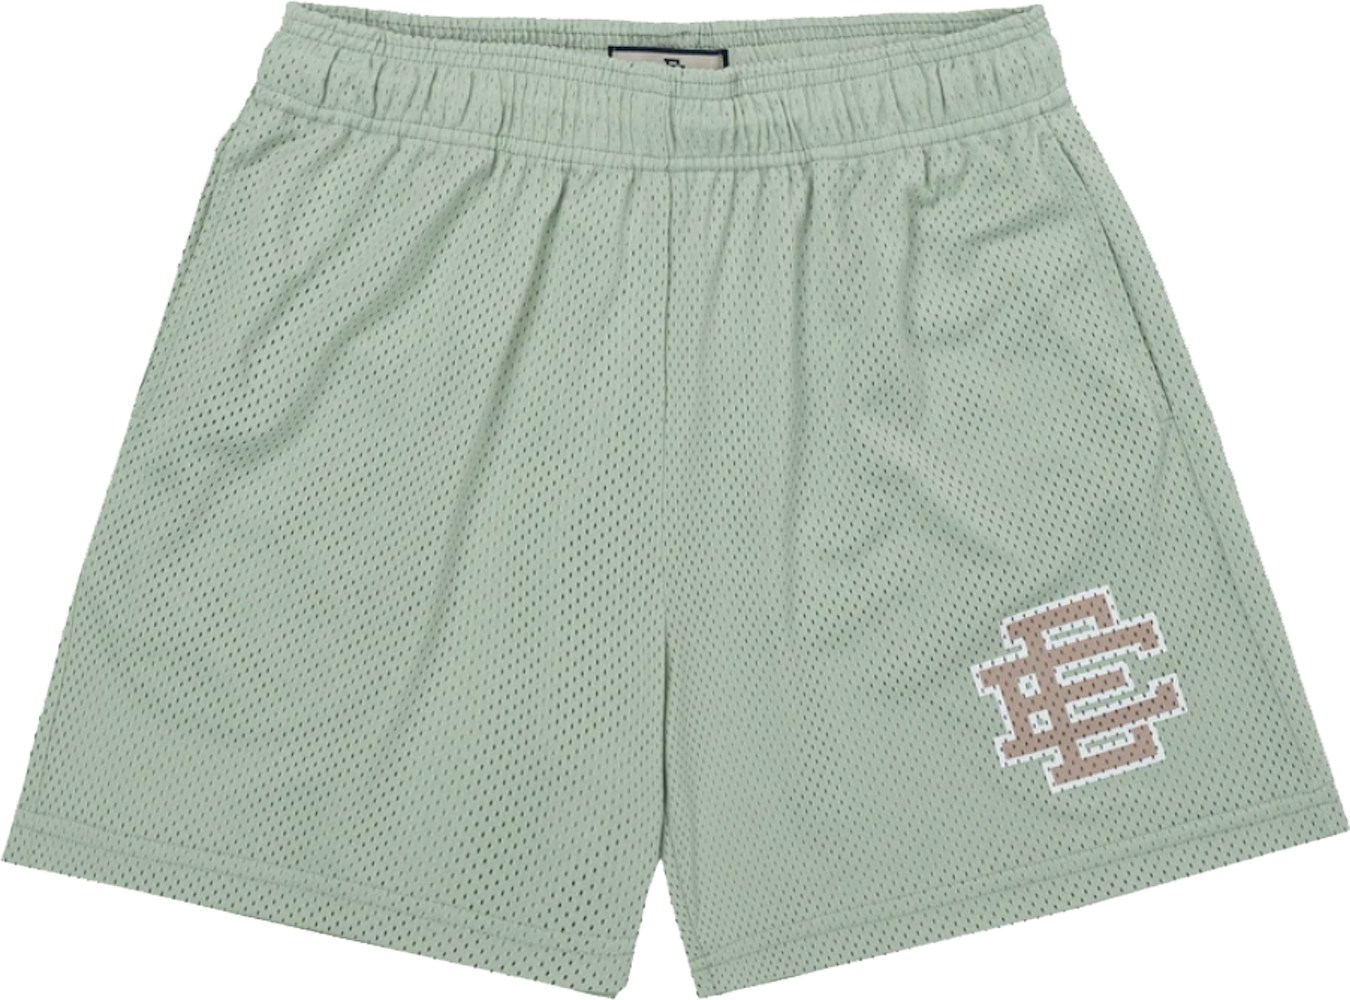 Eric Emanuel EE Basic Short Green/Taupe - SS21